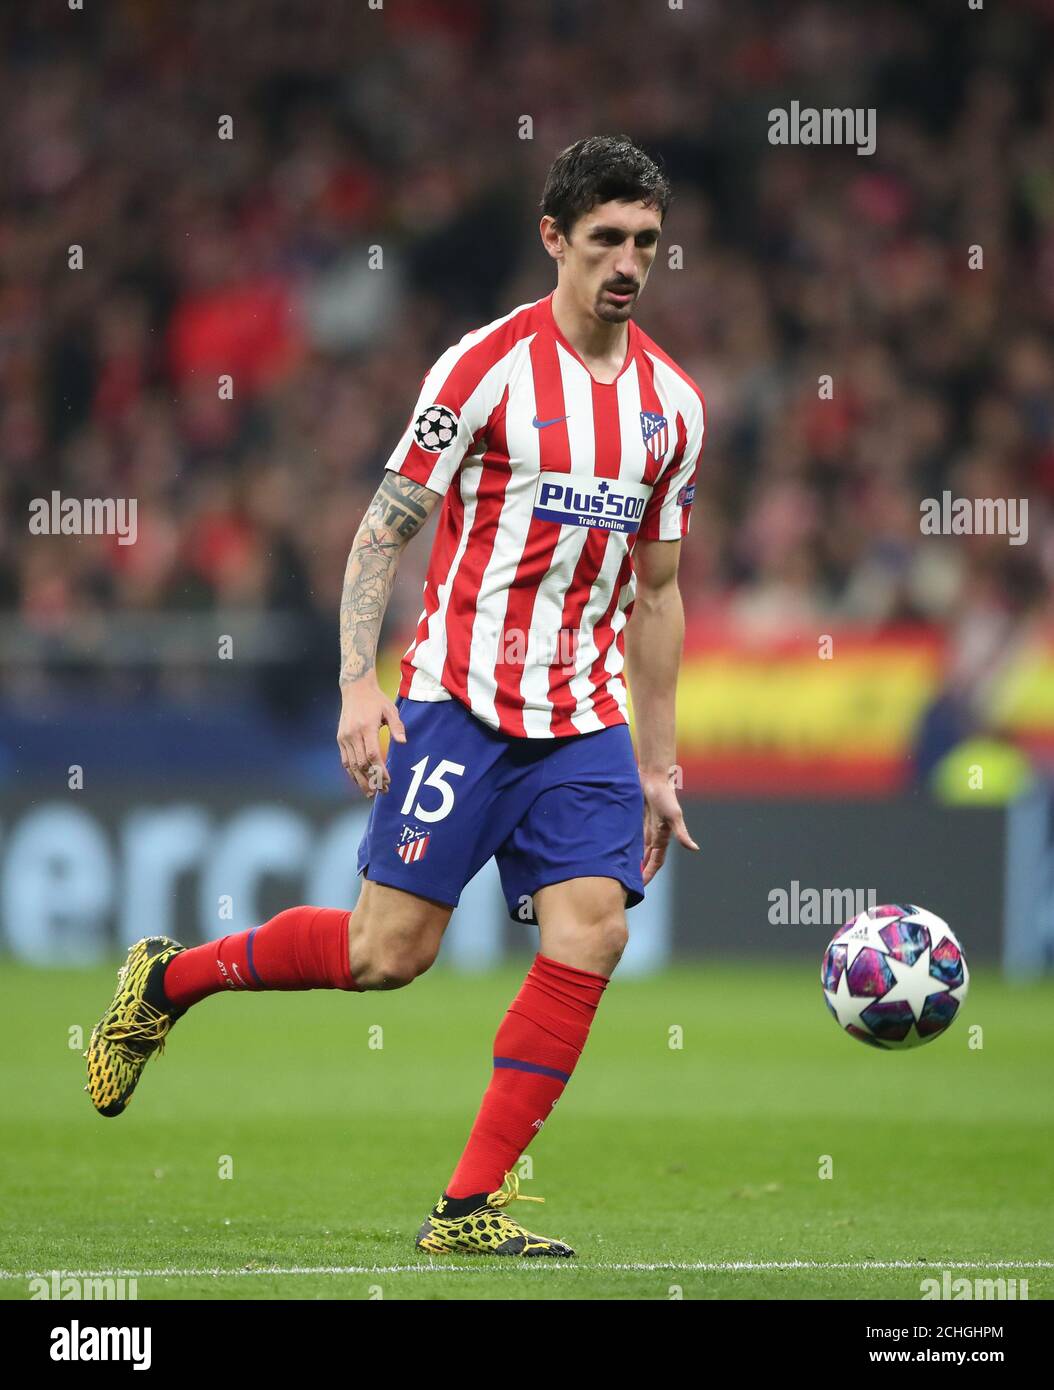 Atletico Madrid's Stefan Savic during the UEFA Champions League round of 16 first leg match at Wanda Metropolitano, Madrid. Stock Photo